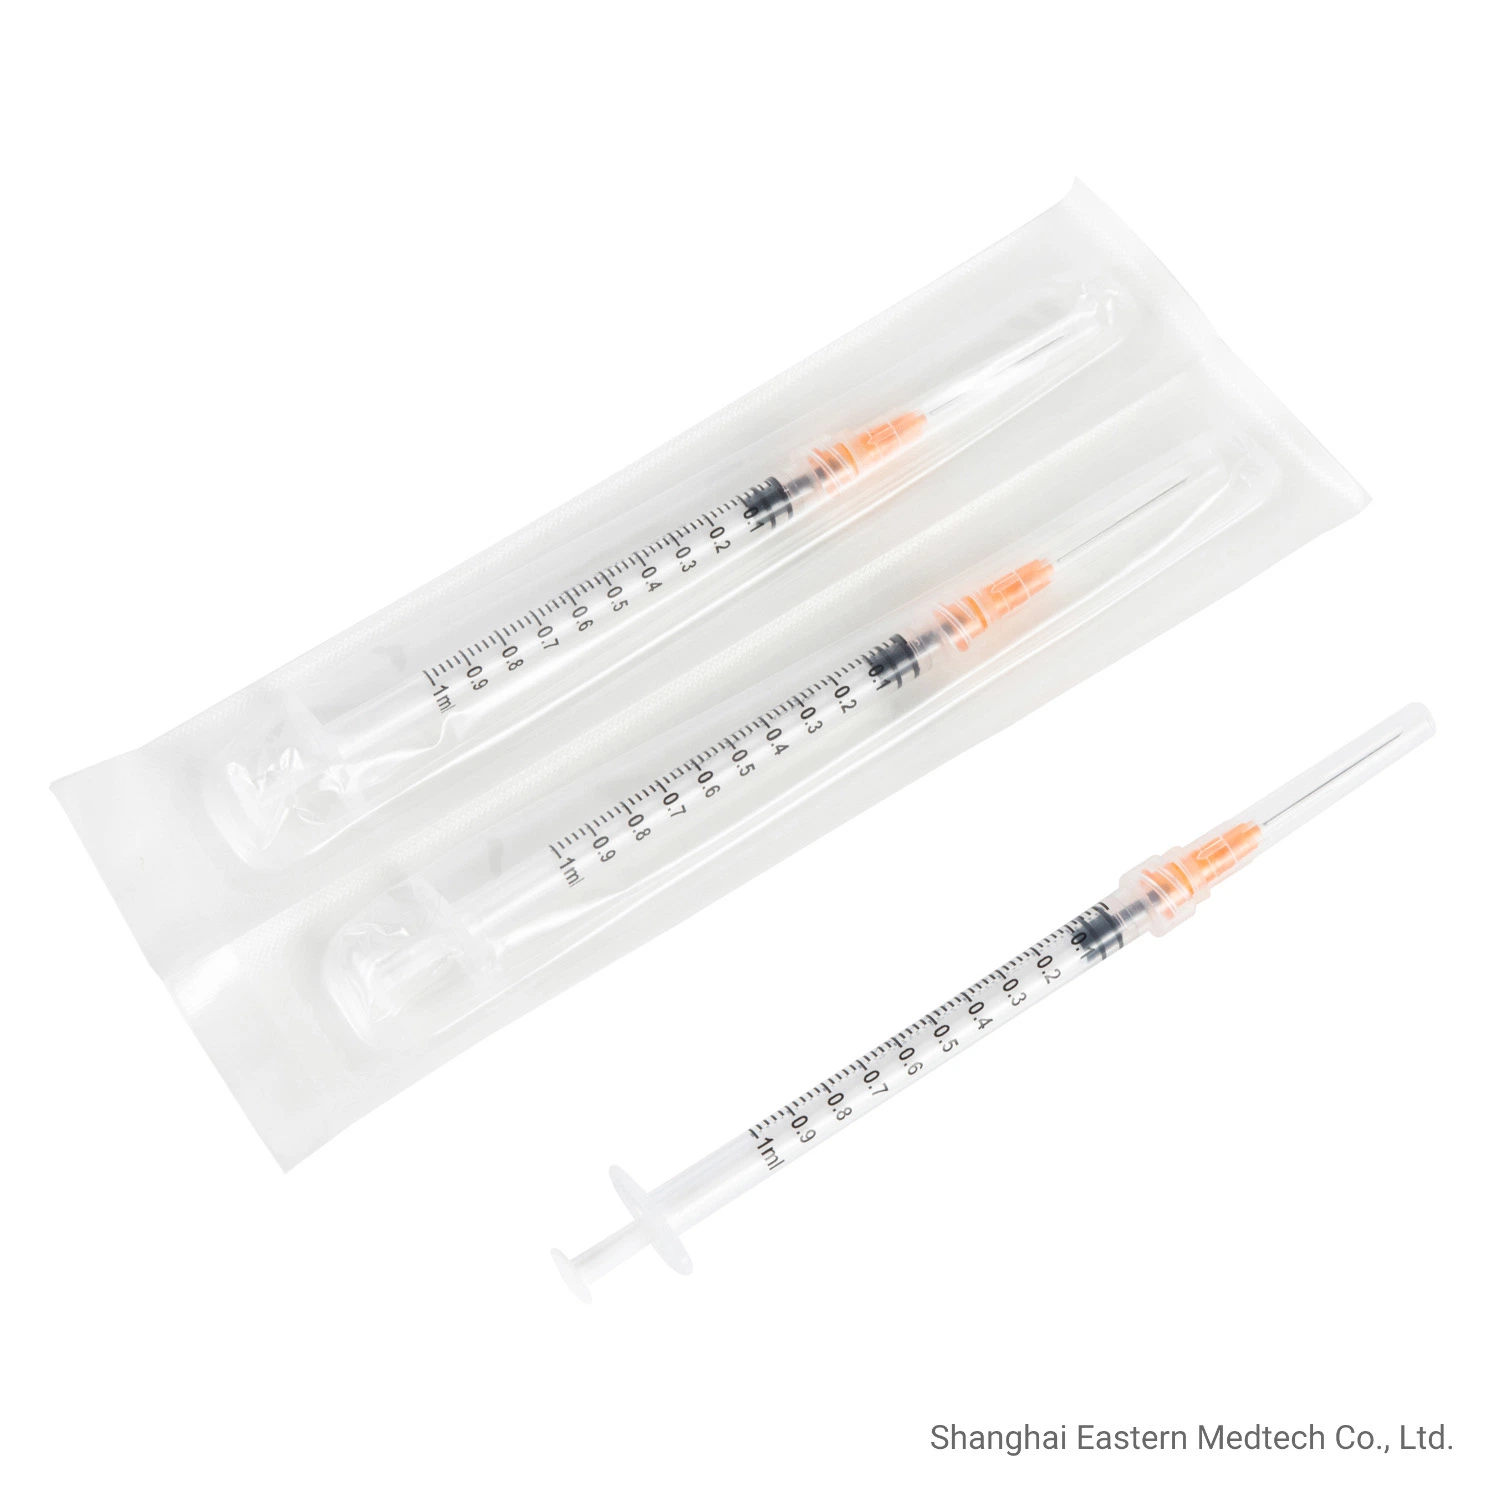 Hospital Instrument Plastic Material Disposable Safety Professional High quality/High cost performance  with Fixed Needle 1ml Vaccine Syringe